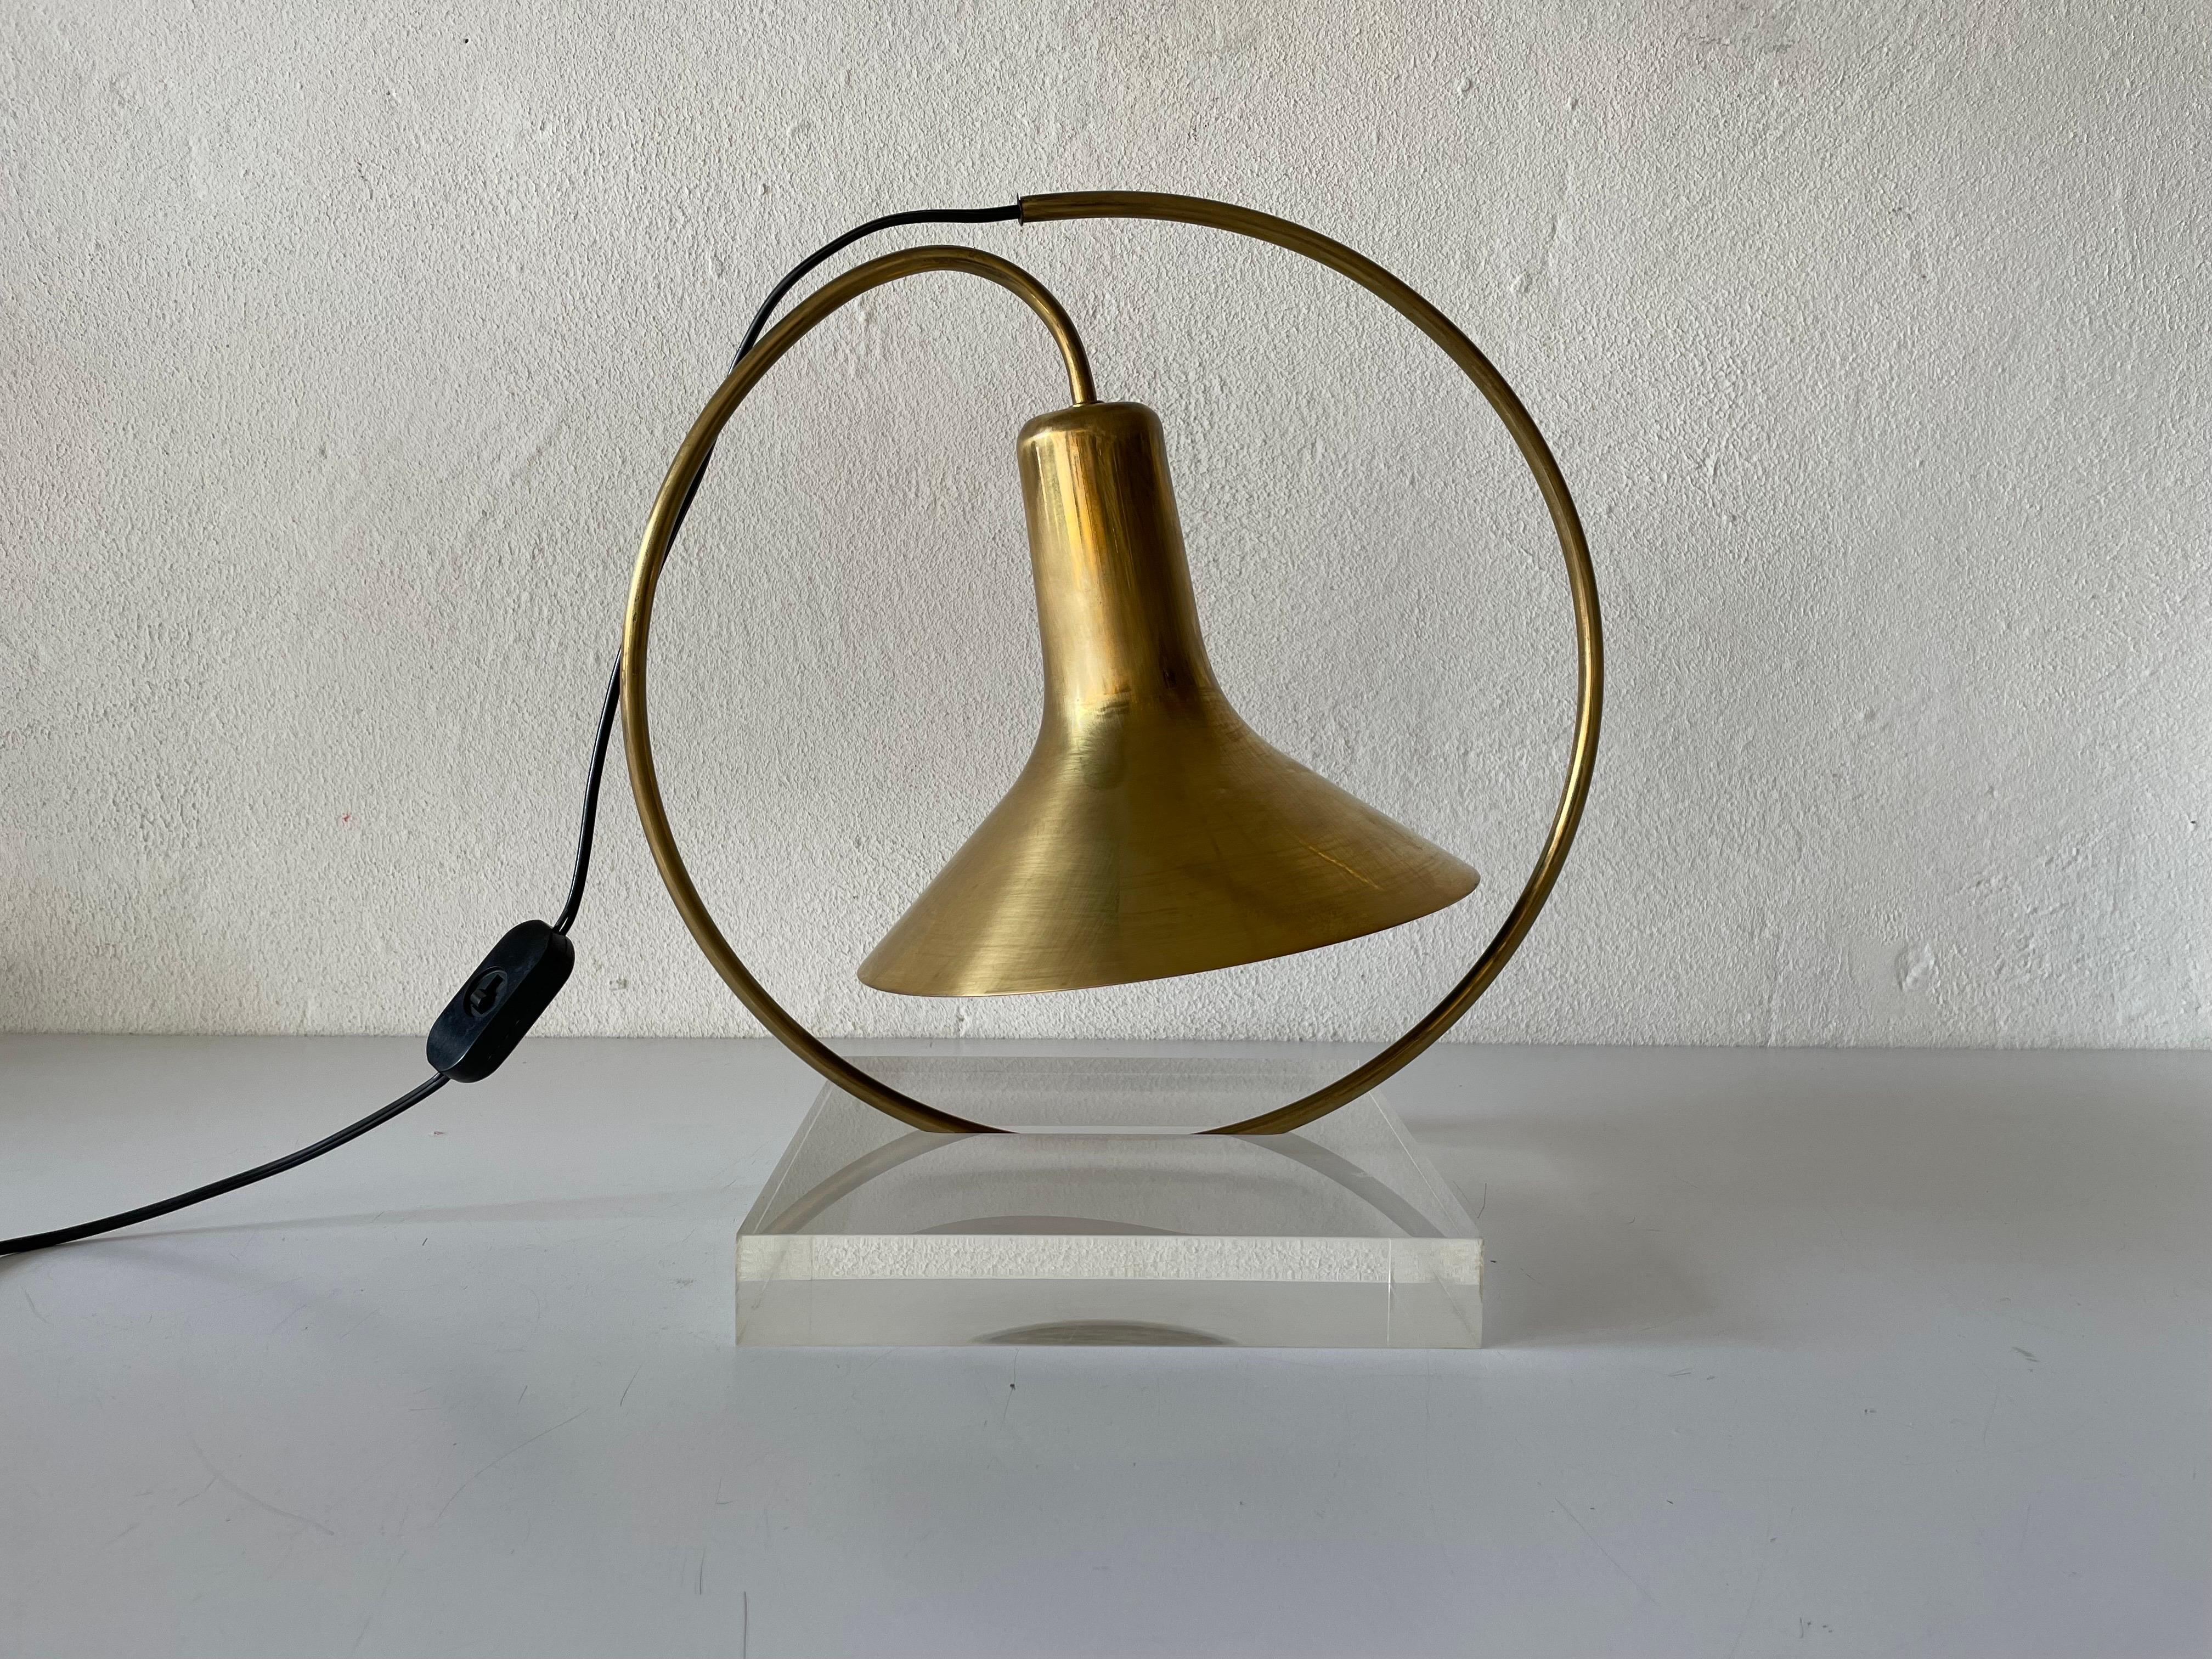 Brass & Lucite Trumpet Design Table Lamp, 1960s, Italy In Good Condition For Sale In Hagenbach, DE